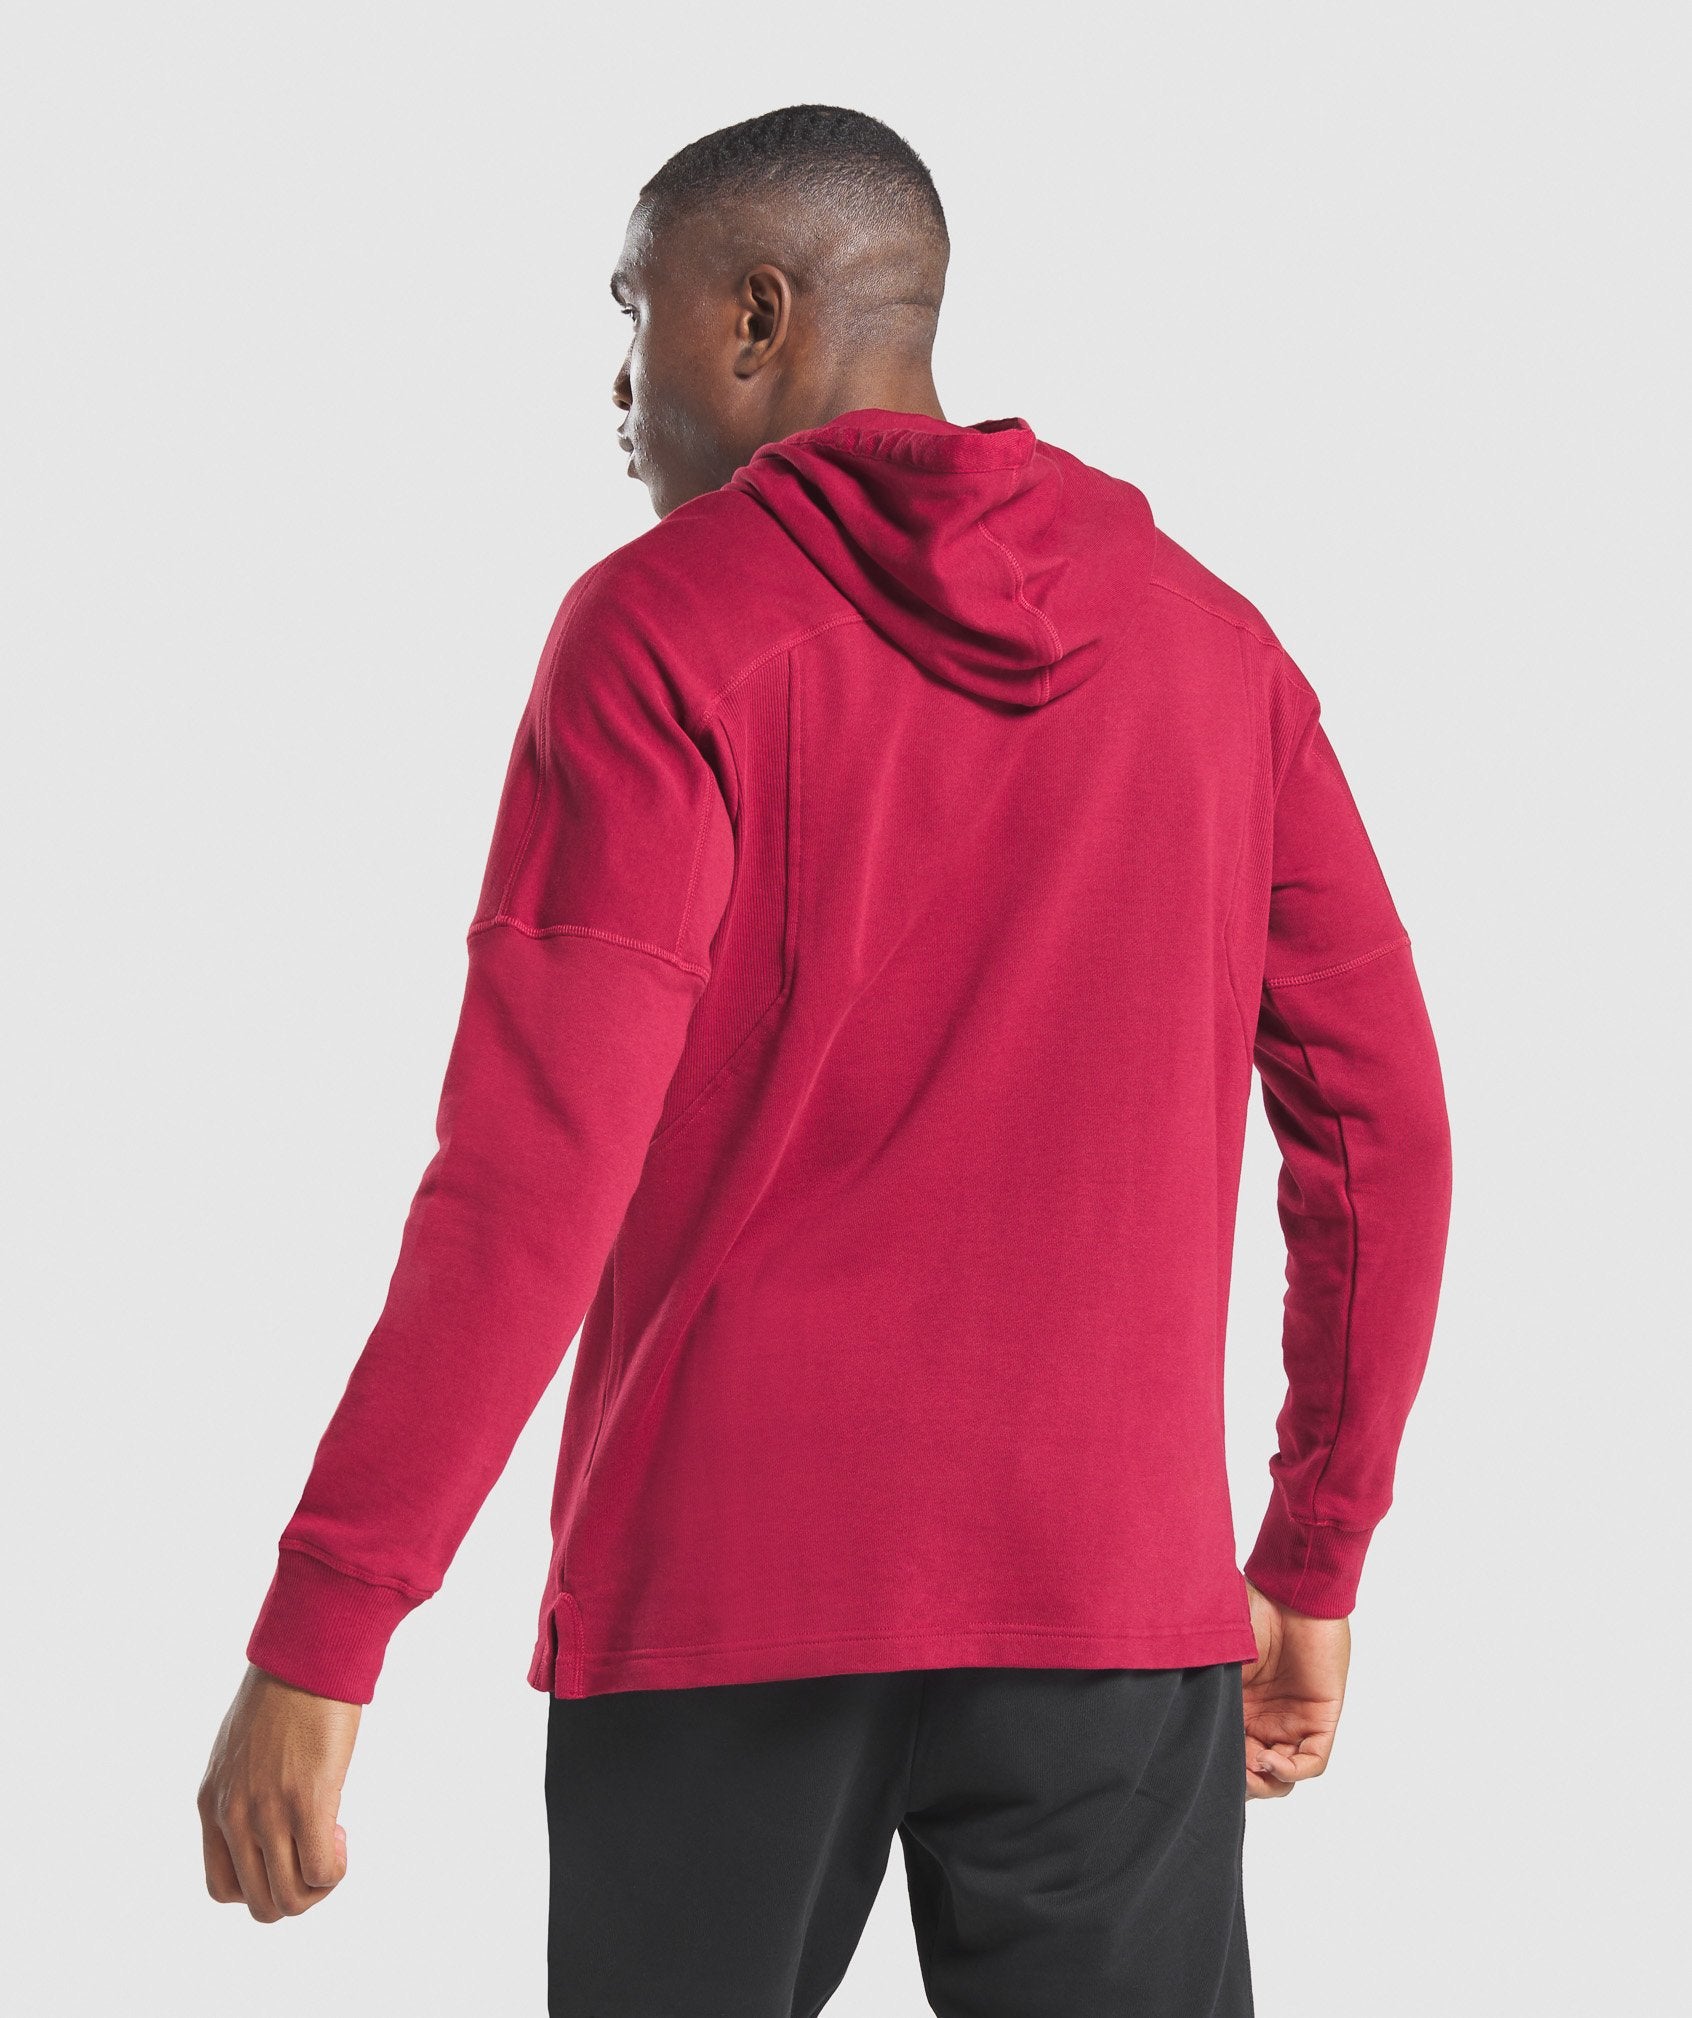 Compound Hoodie in Burgundy - view 2